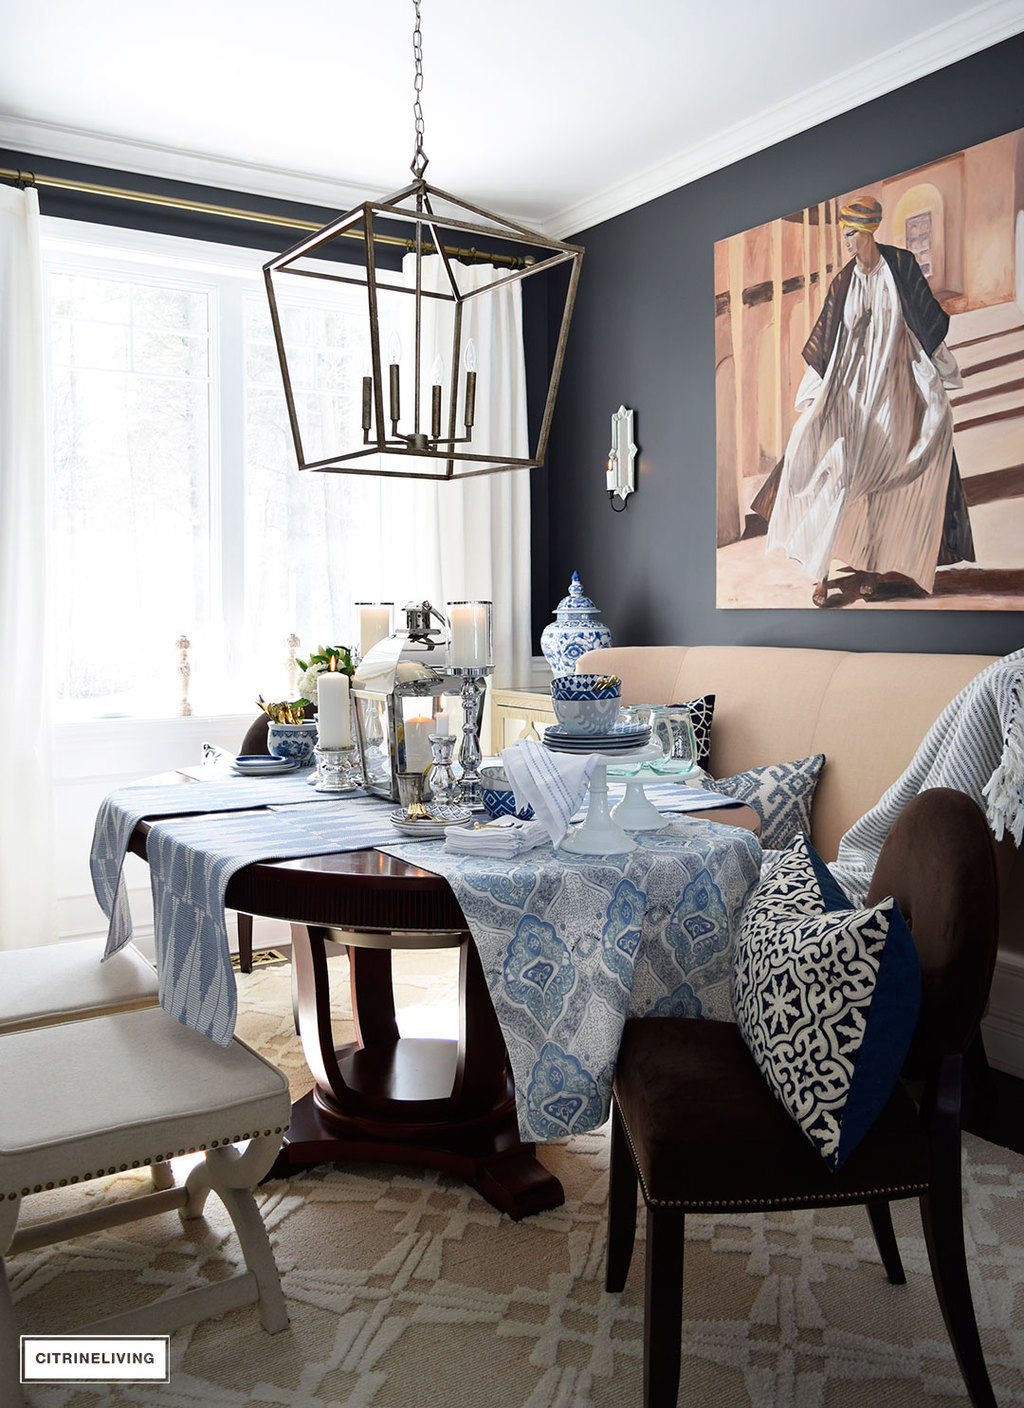 Bring a fresh Spring vibe to your decor with a mix of blue and white pattern and texture.